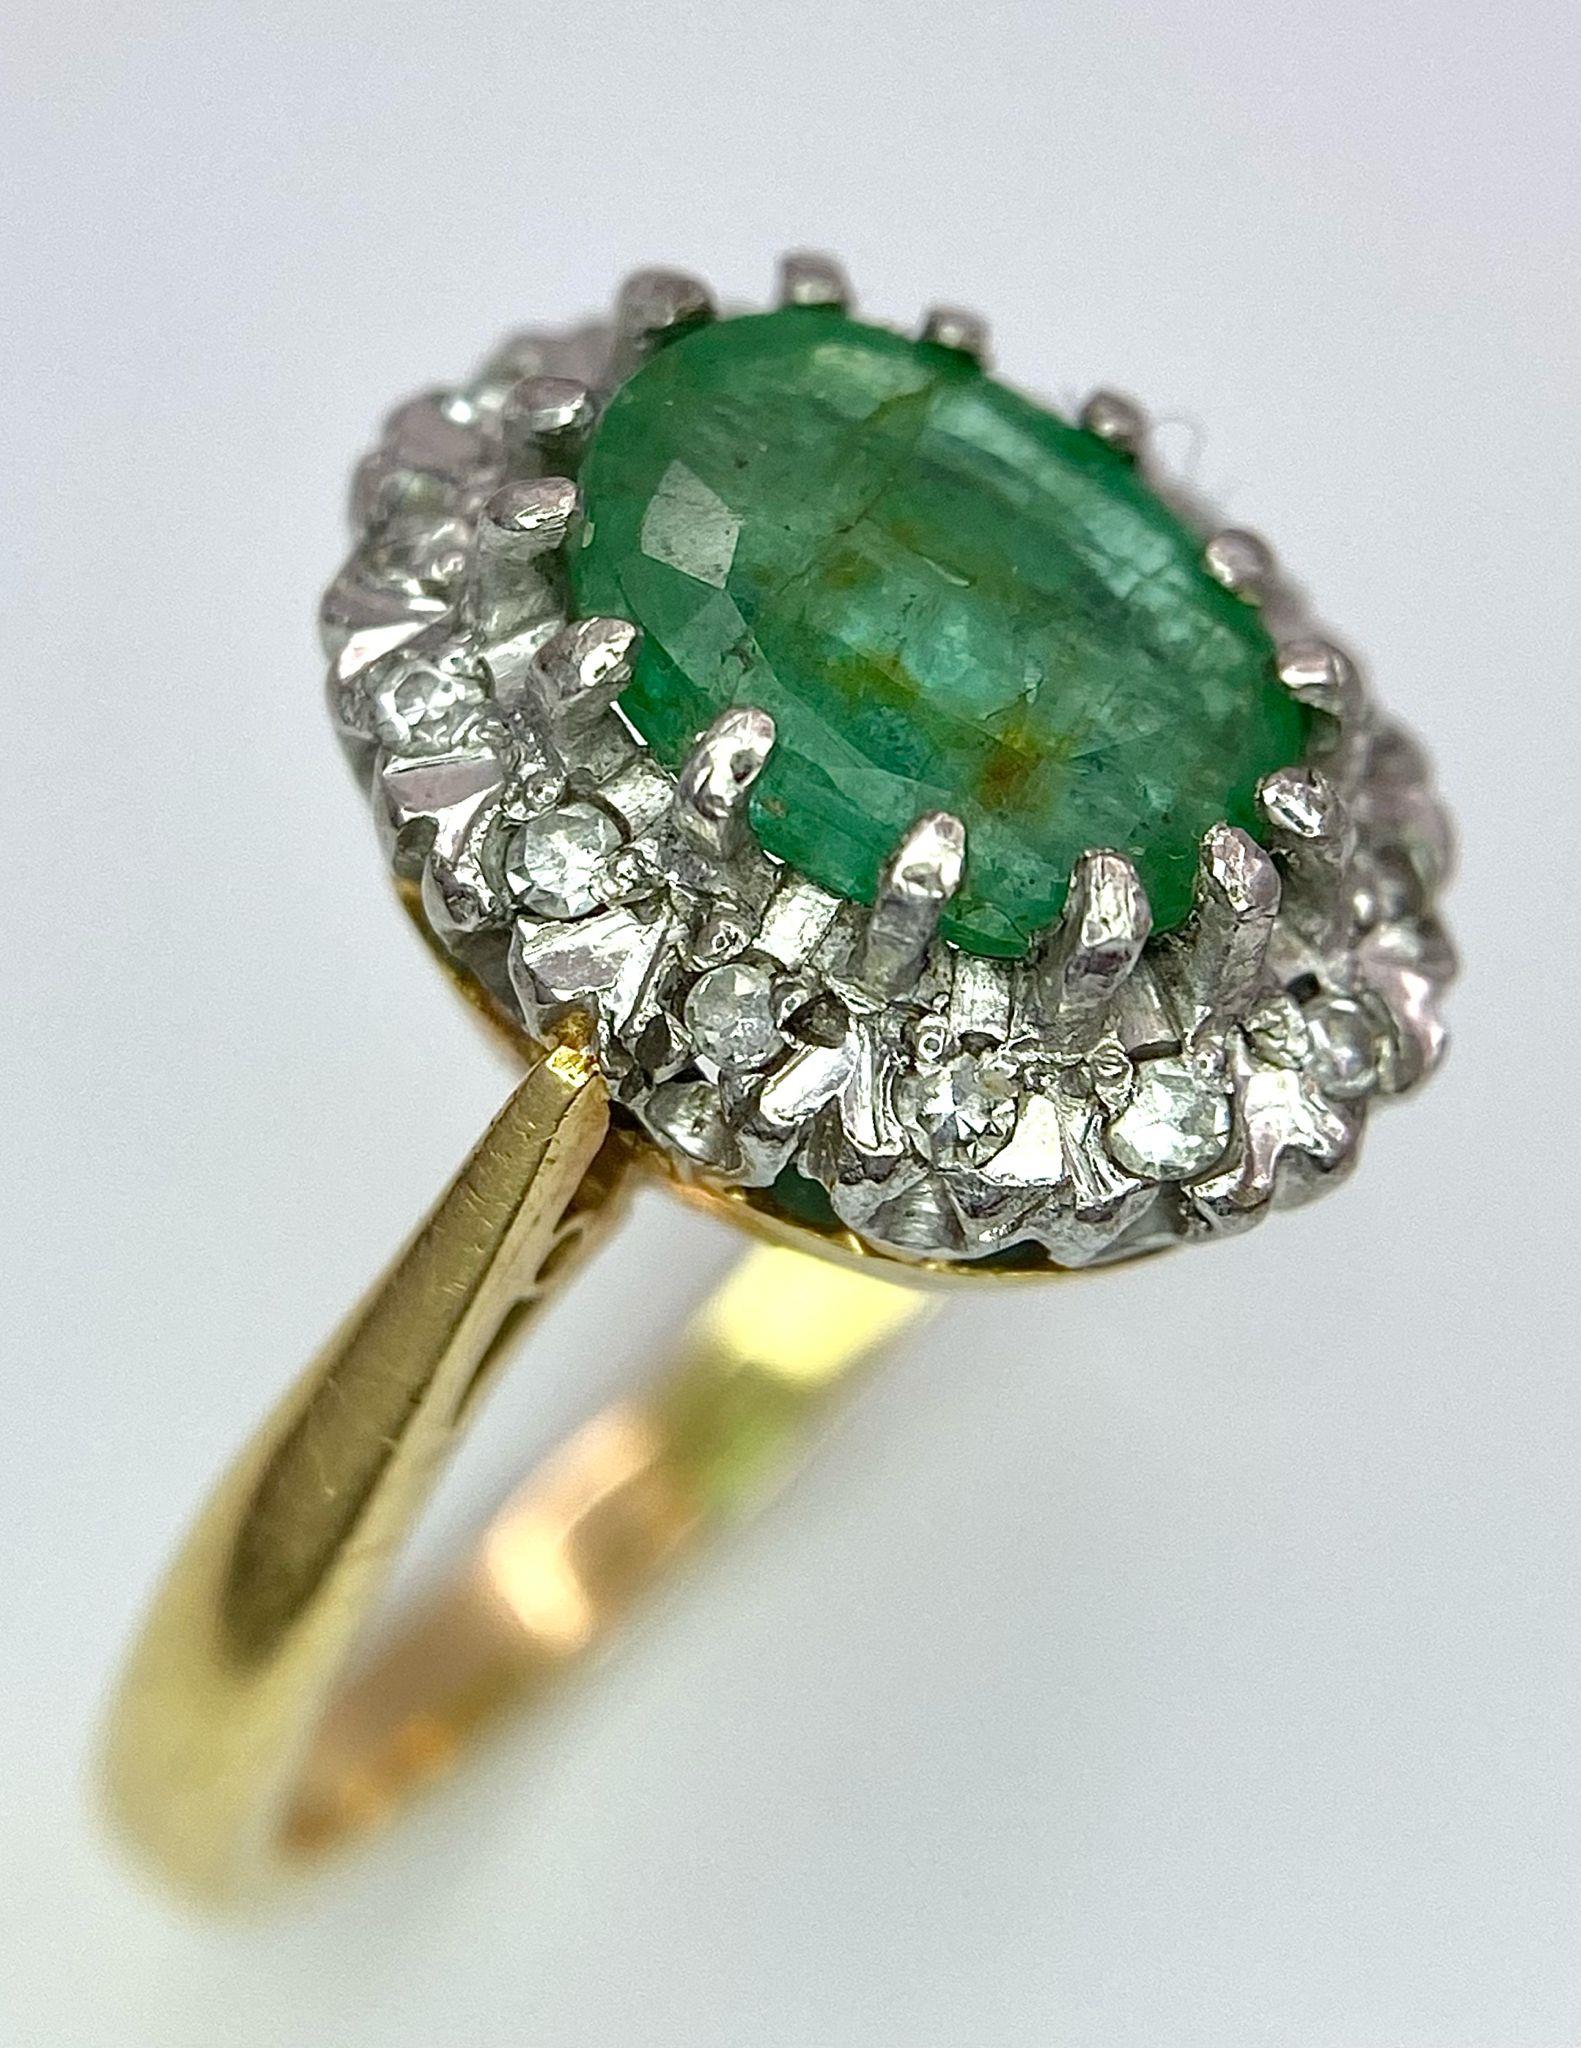 An 18K Yellow Gold, Emerald and Diamond Ring. Central 2ct emerald with a diamond surround. Size J.